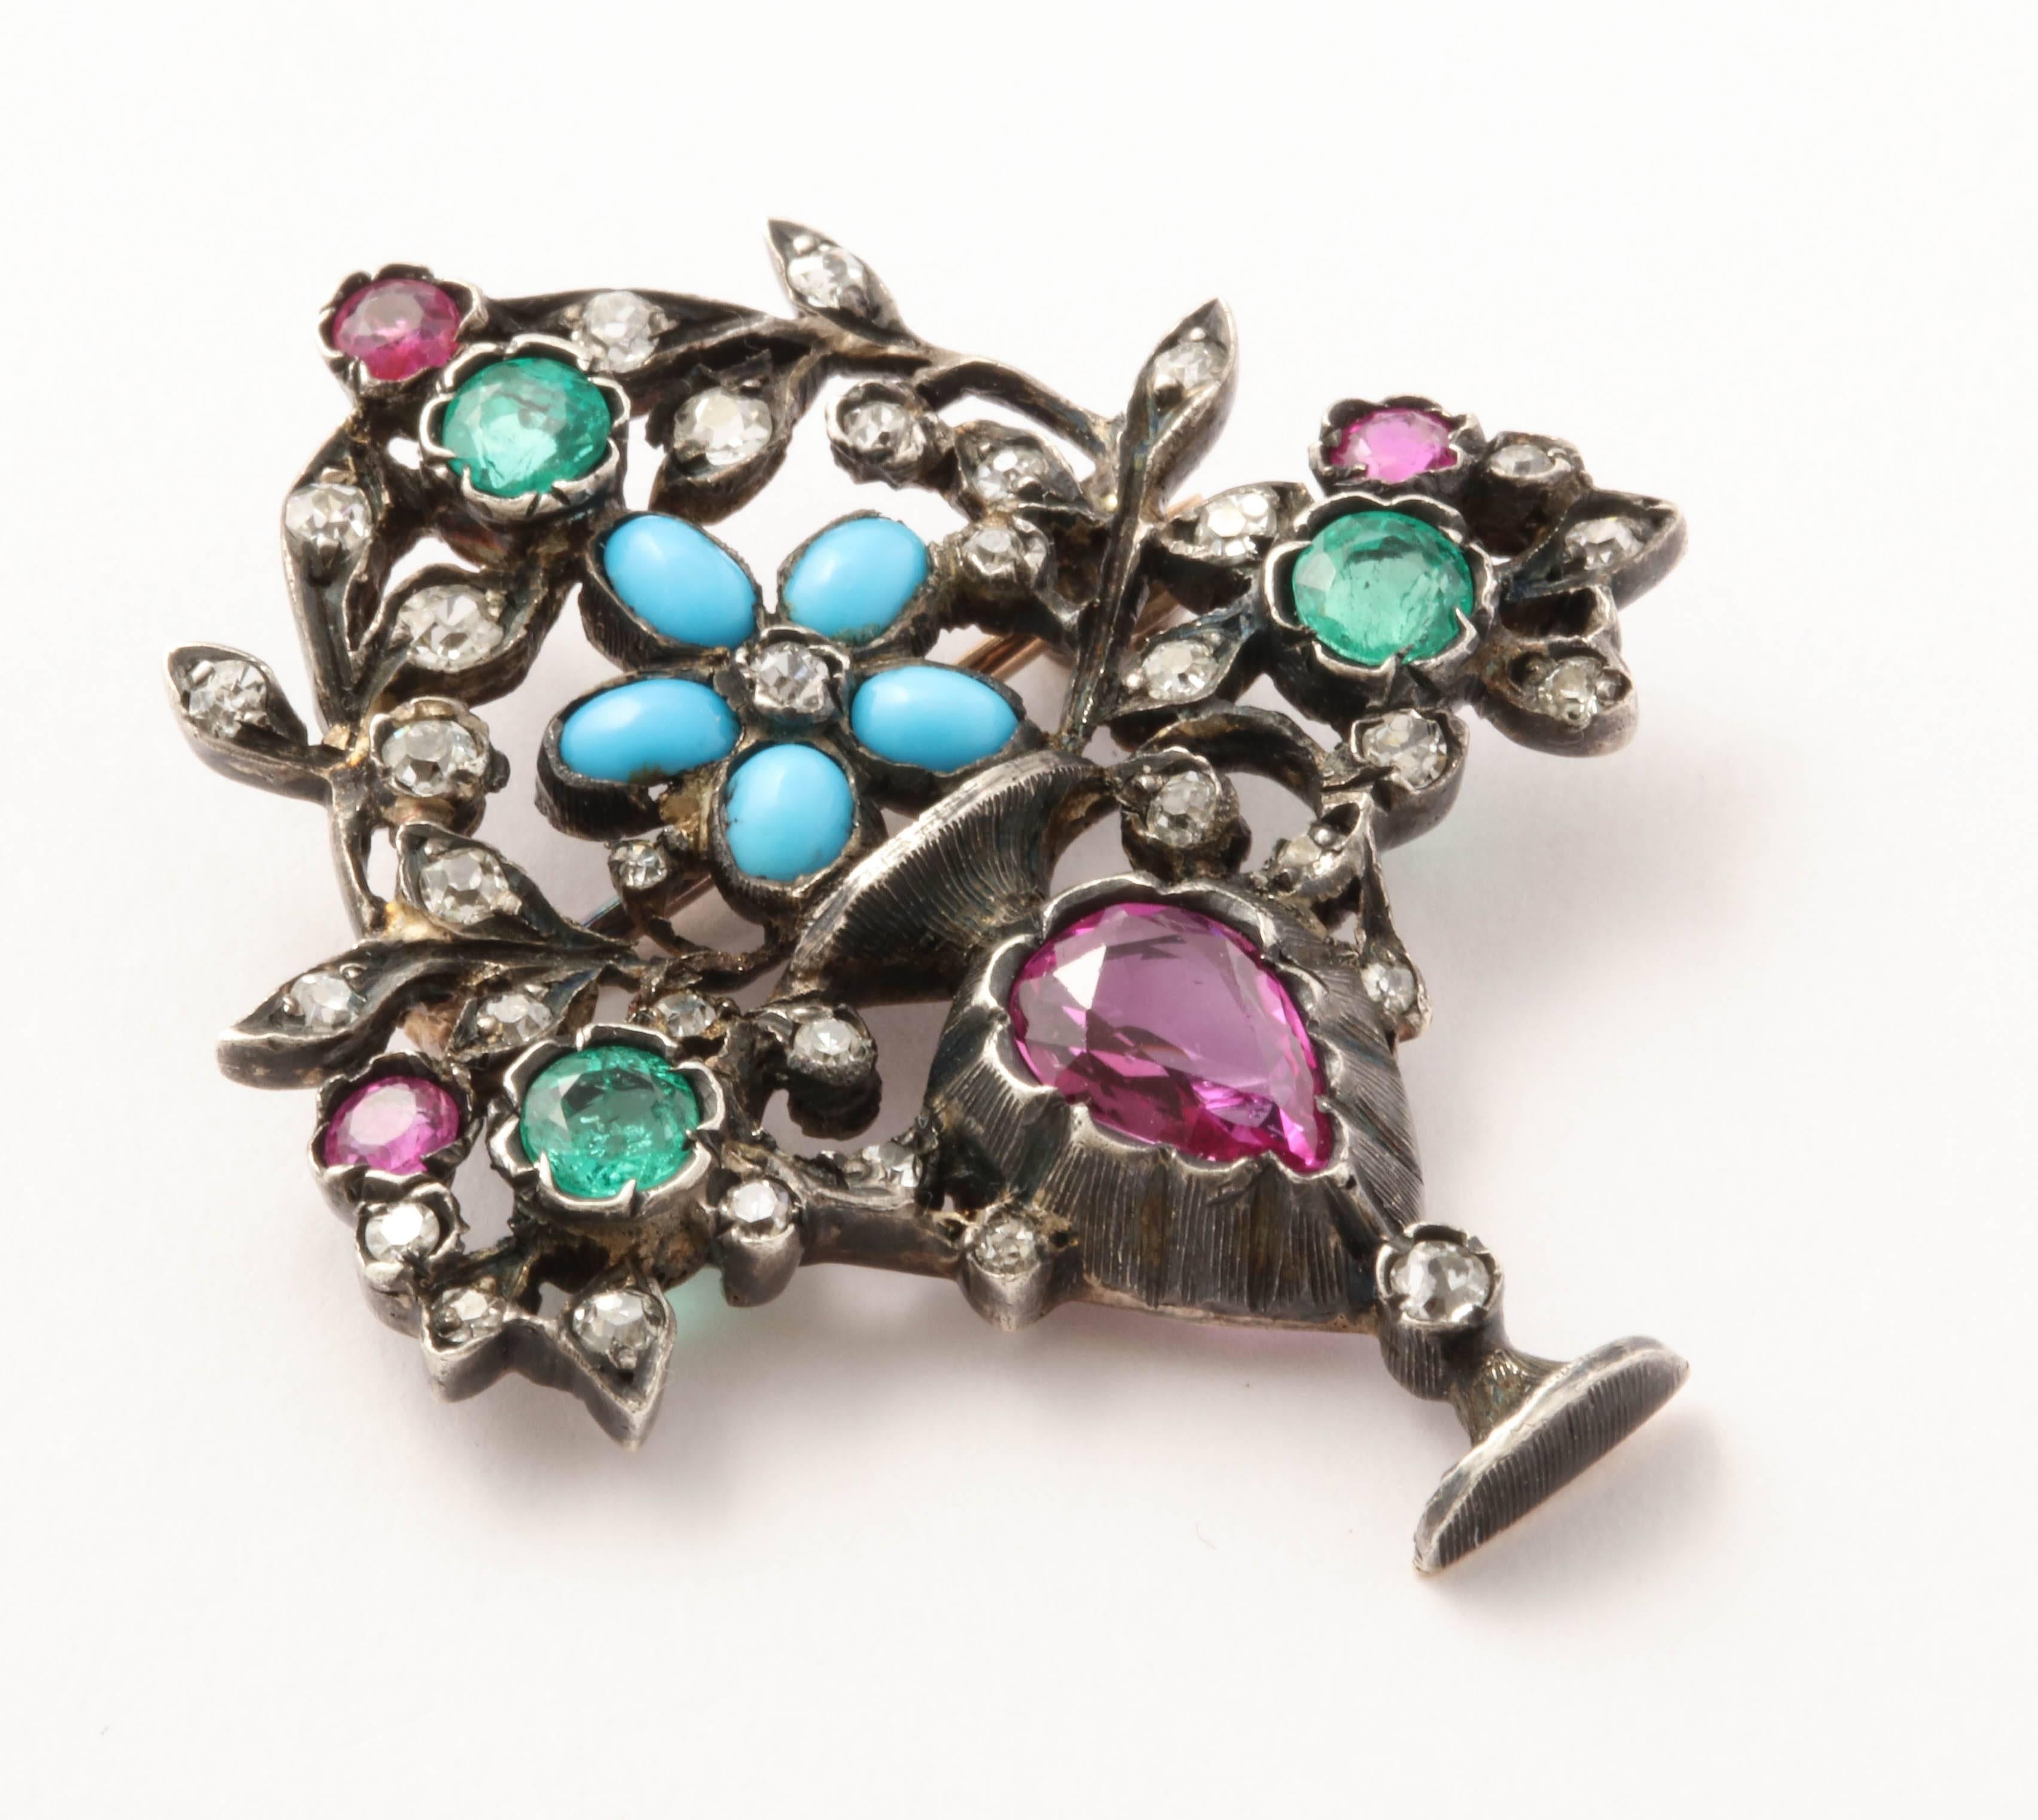 A superb flower-pot brooch in silver over gold, set with rubies, diamonds, emeralds and turquoises.  In pristine condition and with particularly vibrant colors.  